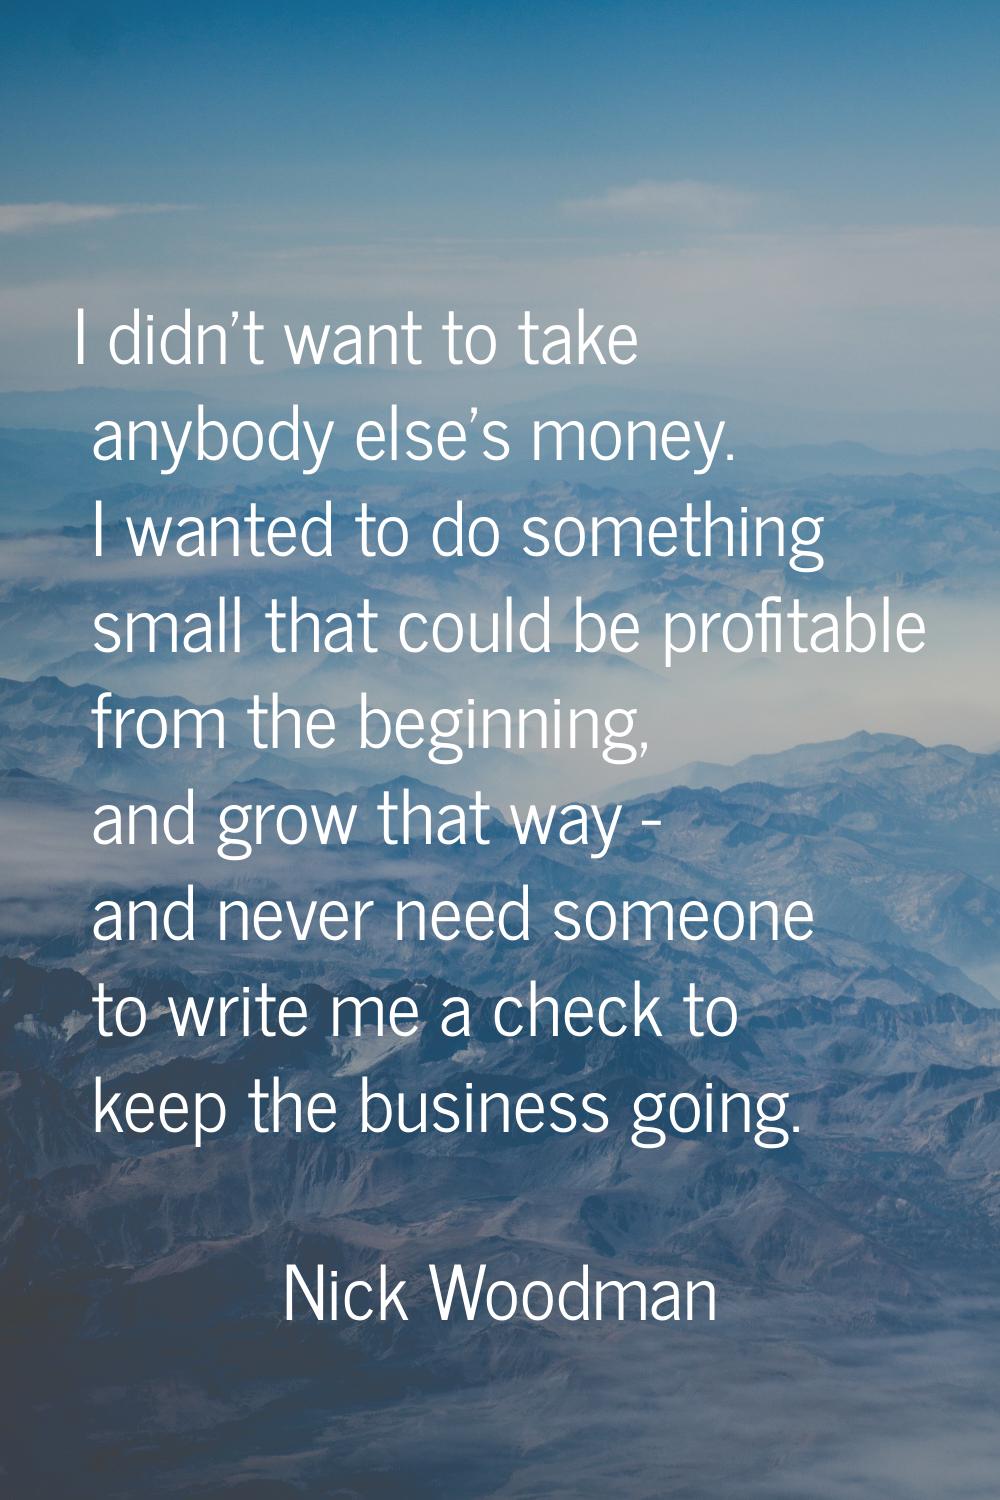 I didn't want to take anybody else's money. I wanted to do something small that could be profitable